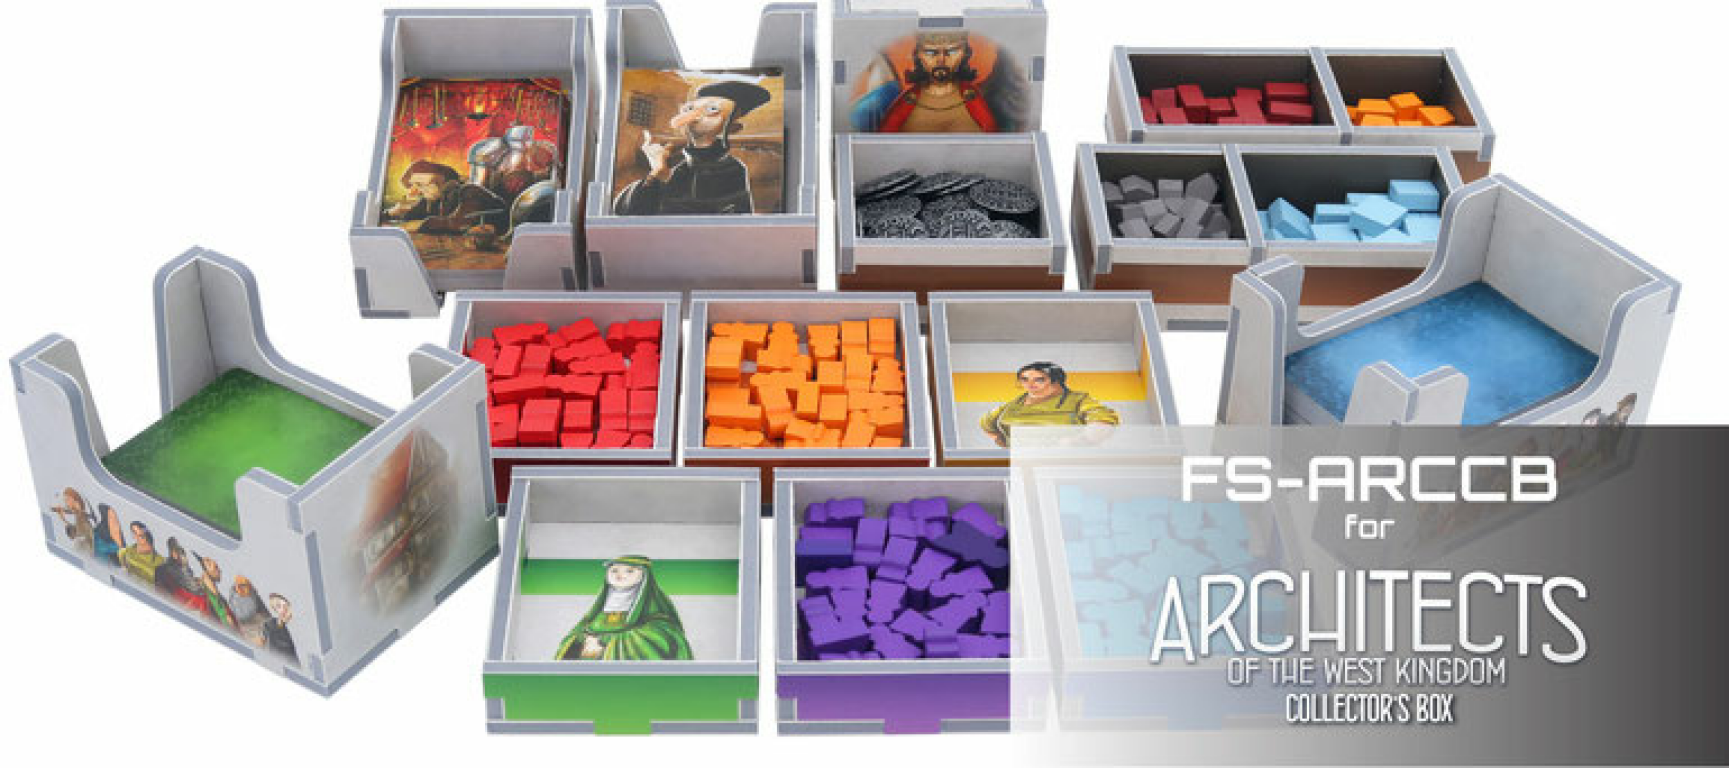 Architects of the West Kingdom Collector's Box: Folded Space Insert partes